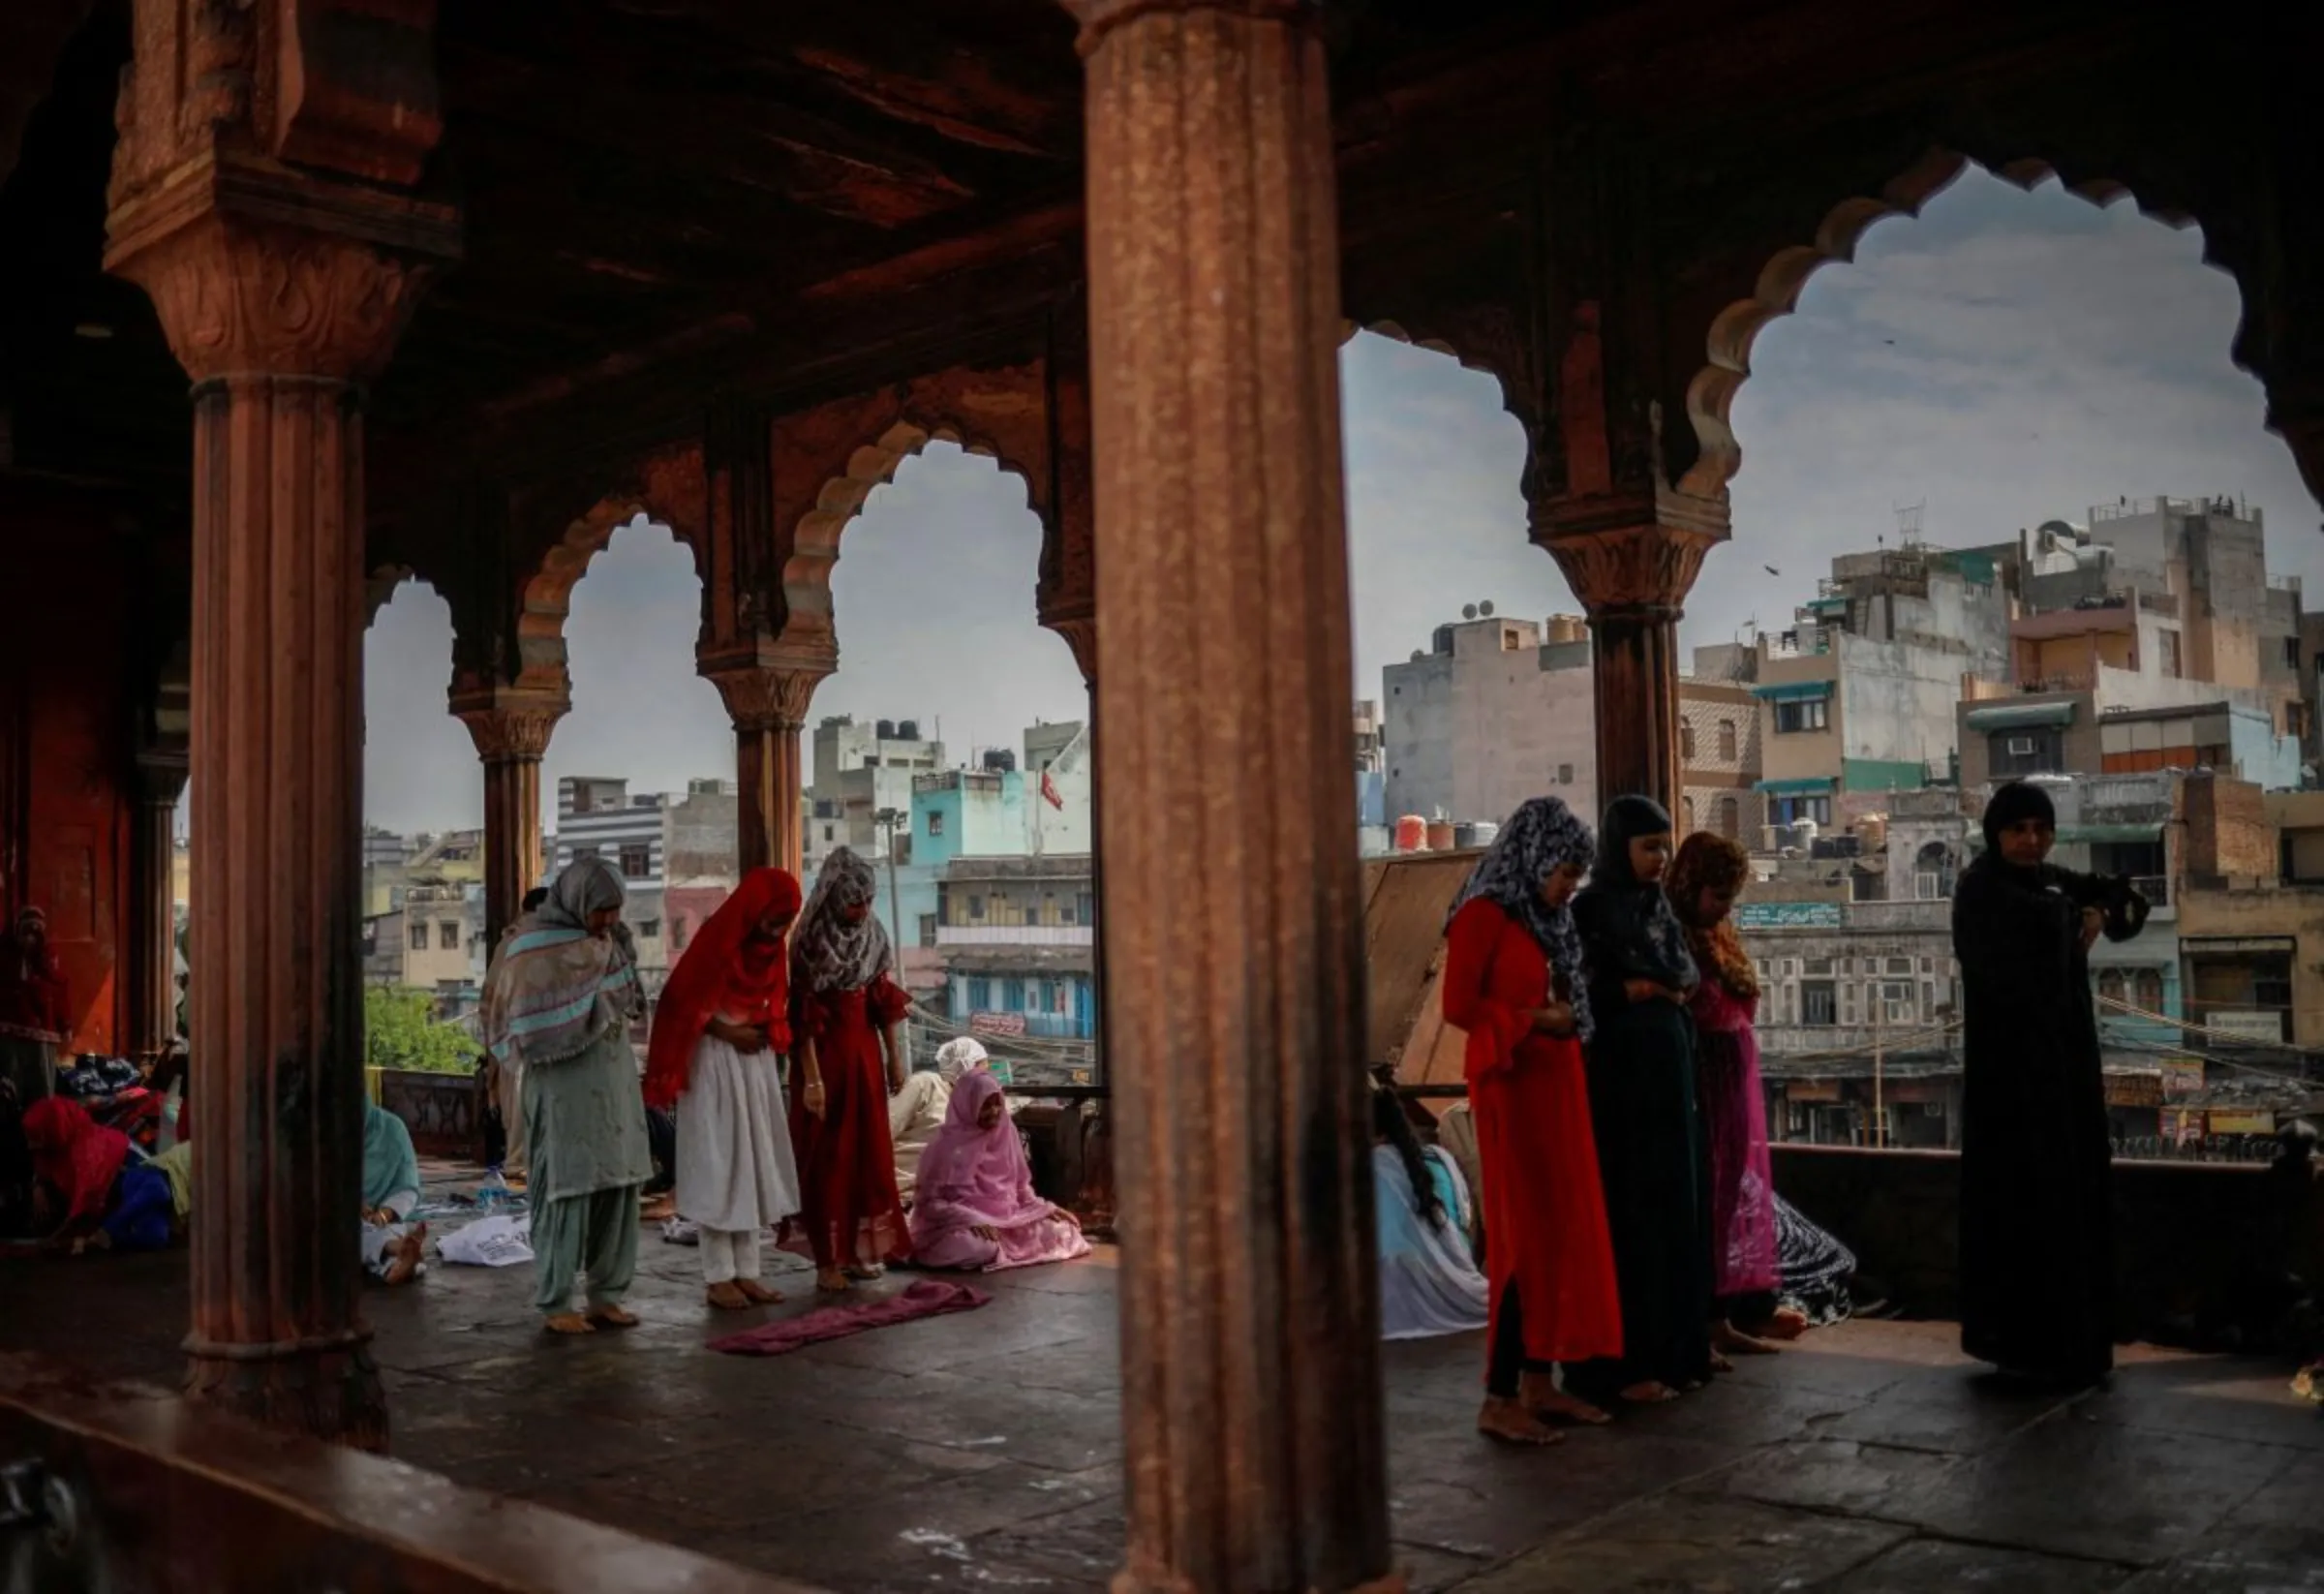 Muslim women pray during the first Friday of the holy month of Ramadan at Jama Masjid (Grand Mosque) in the old quarters of Delhi, India March 24